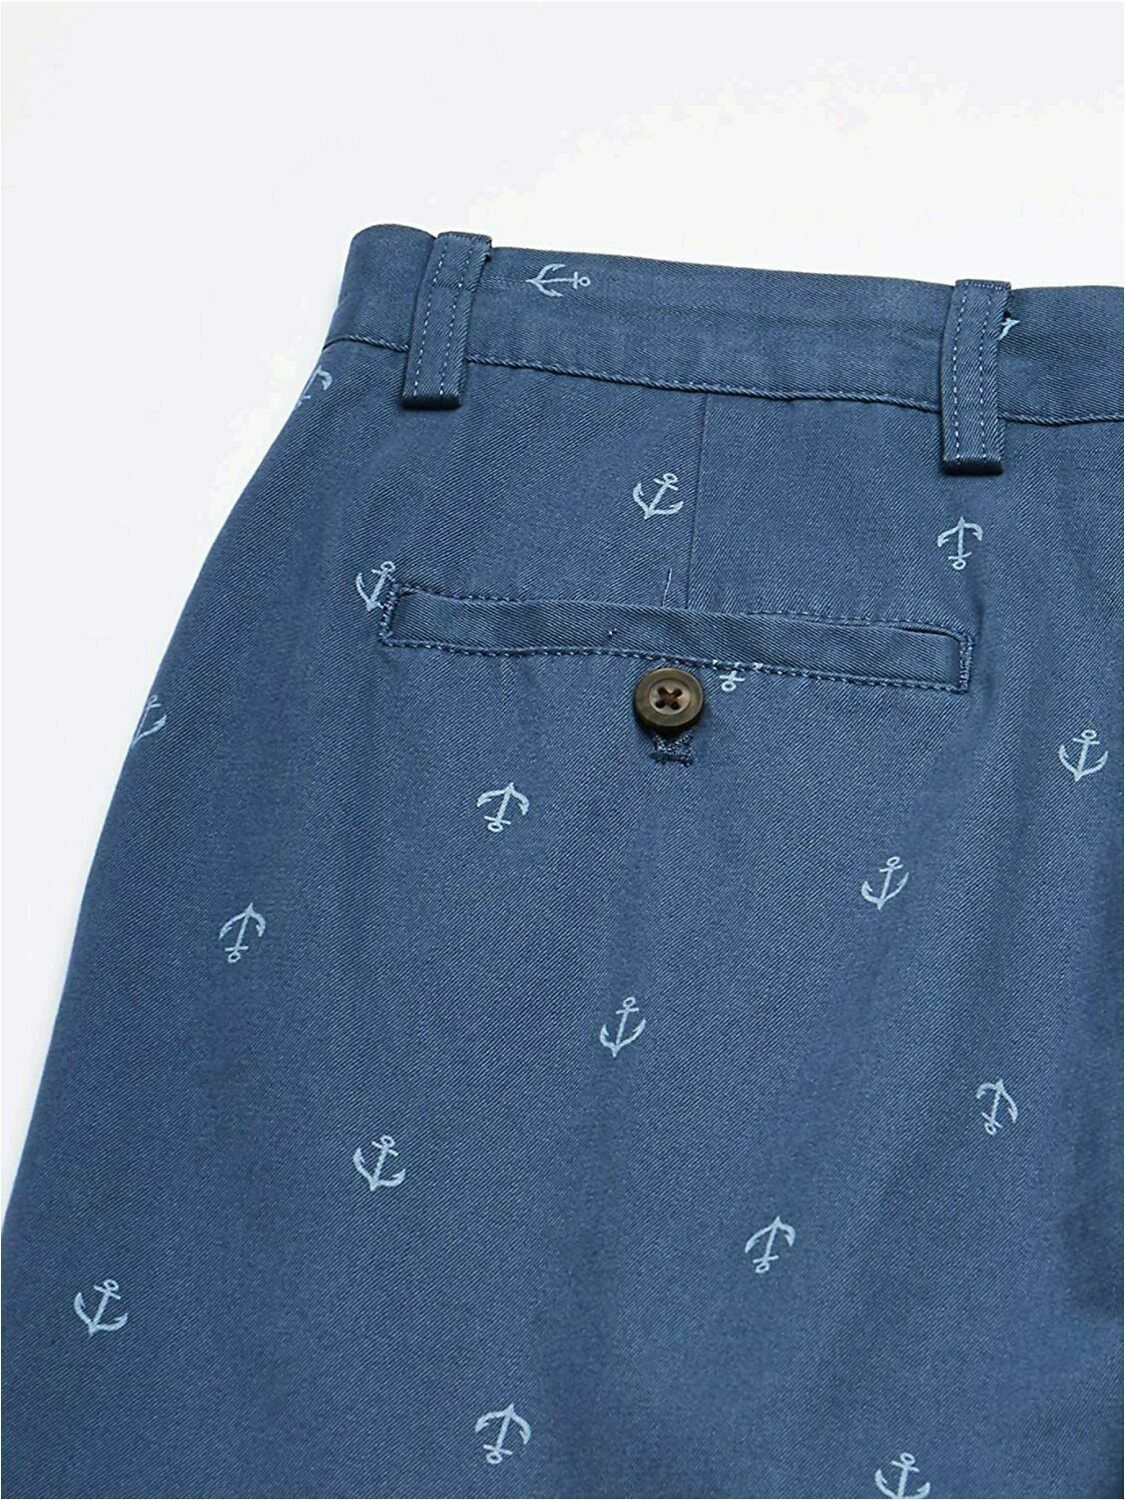 Casual Outdoor Shorts - Men's Big and Tall Fit - Blue Anchor Print